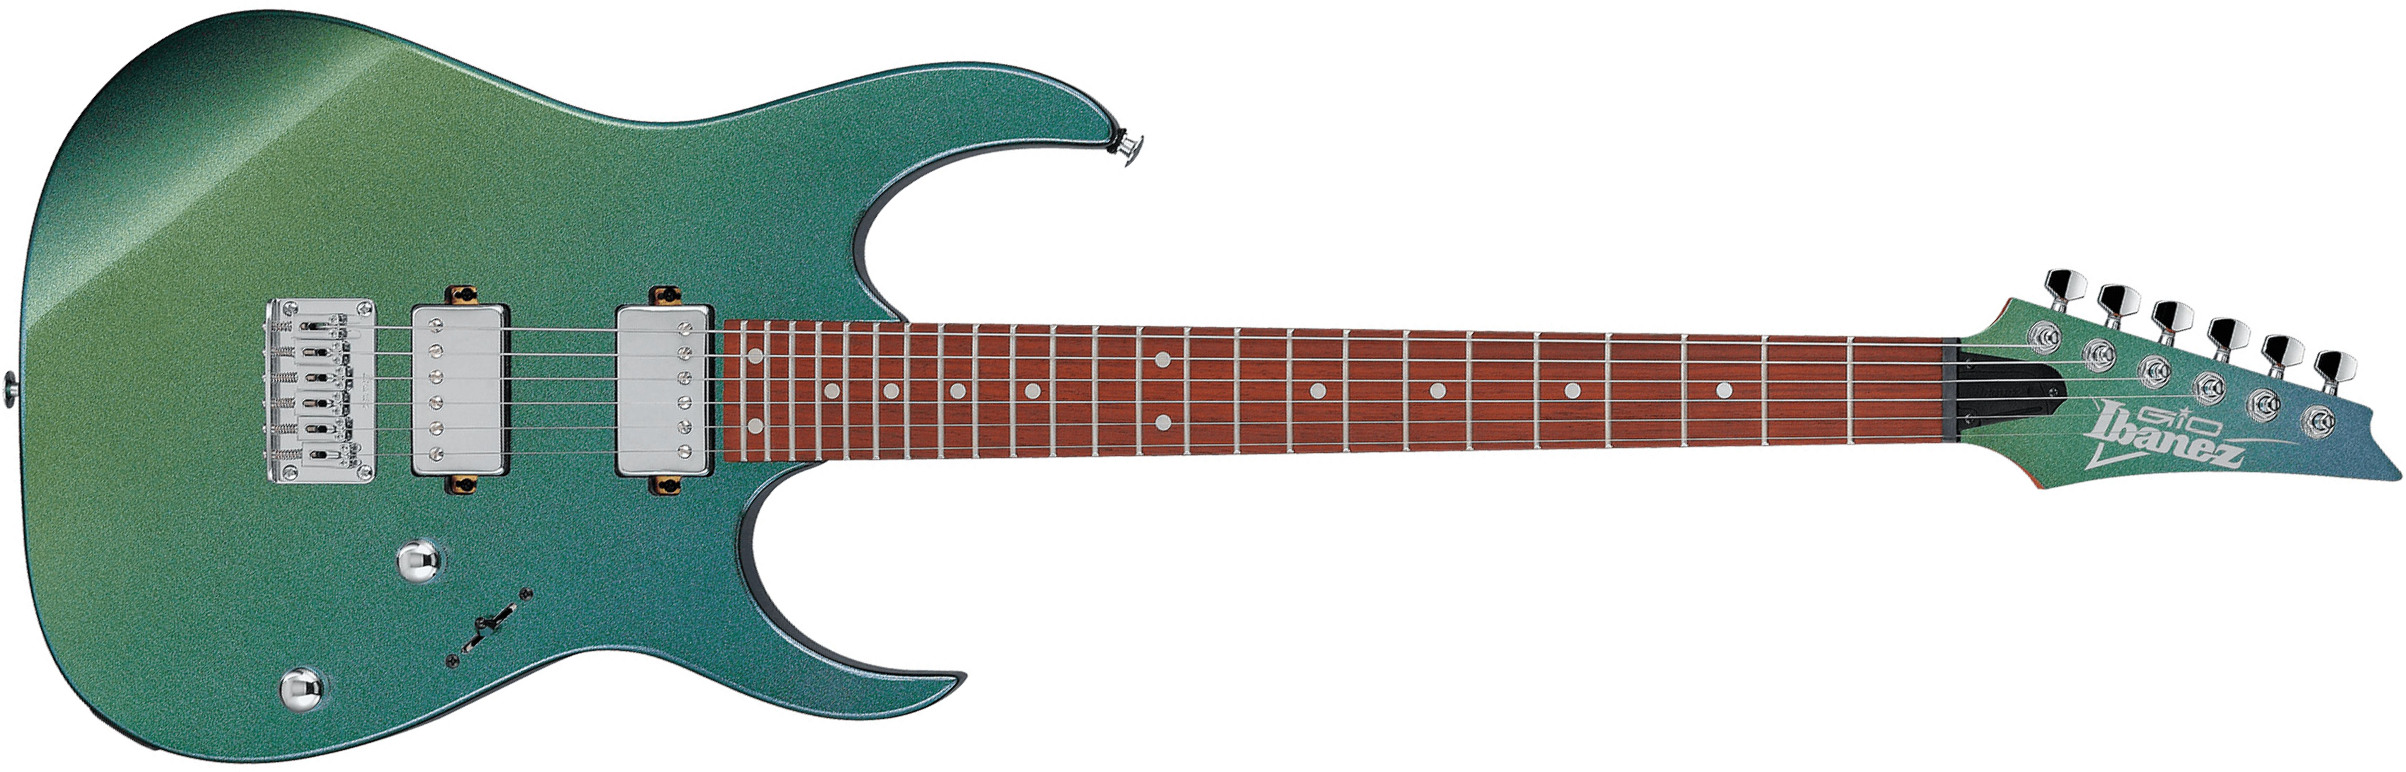 Ibanez Grg121sp Gyc Gio 2h Trem Ama - Green Yellow Chameleon - Str shape electric guitar - Main picture